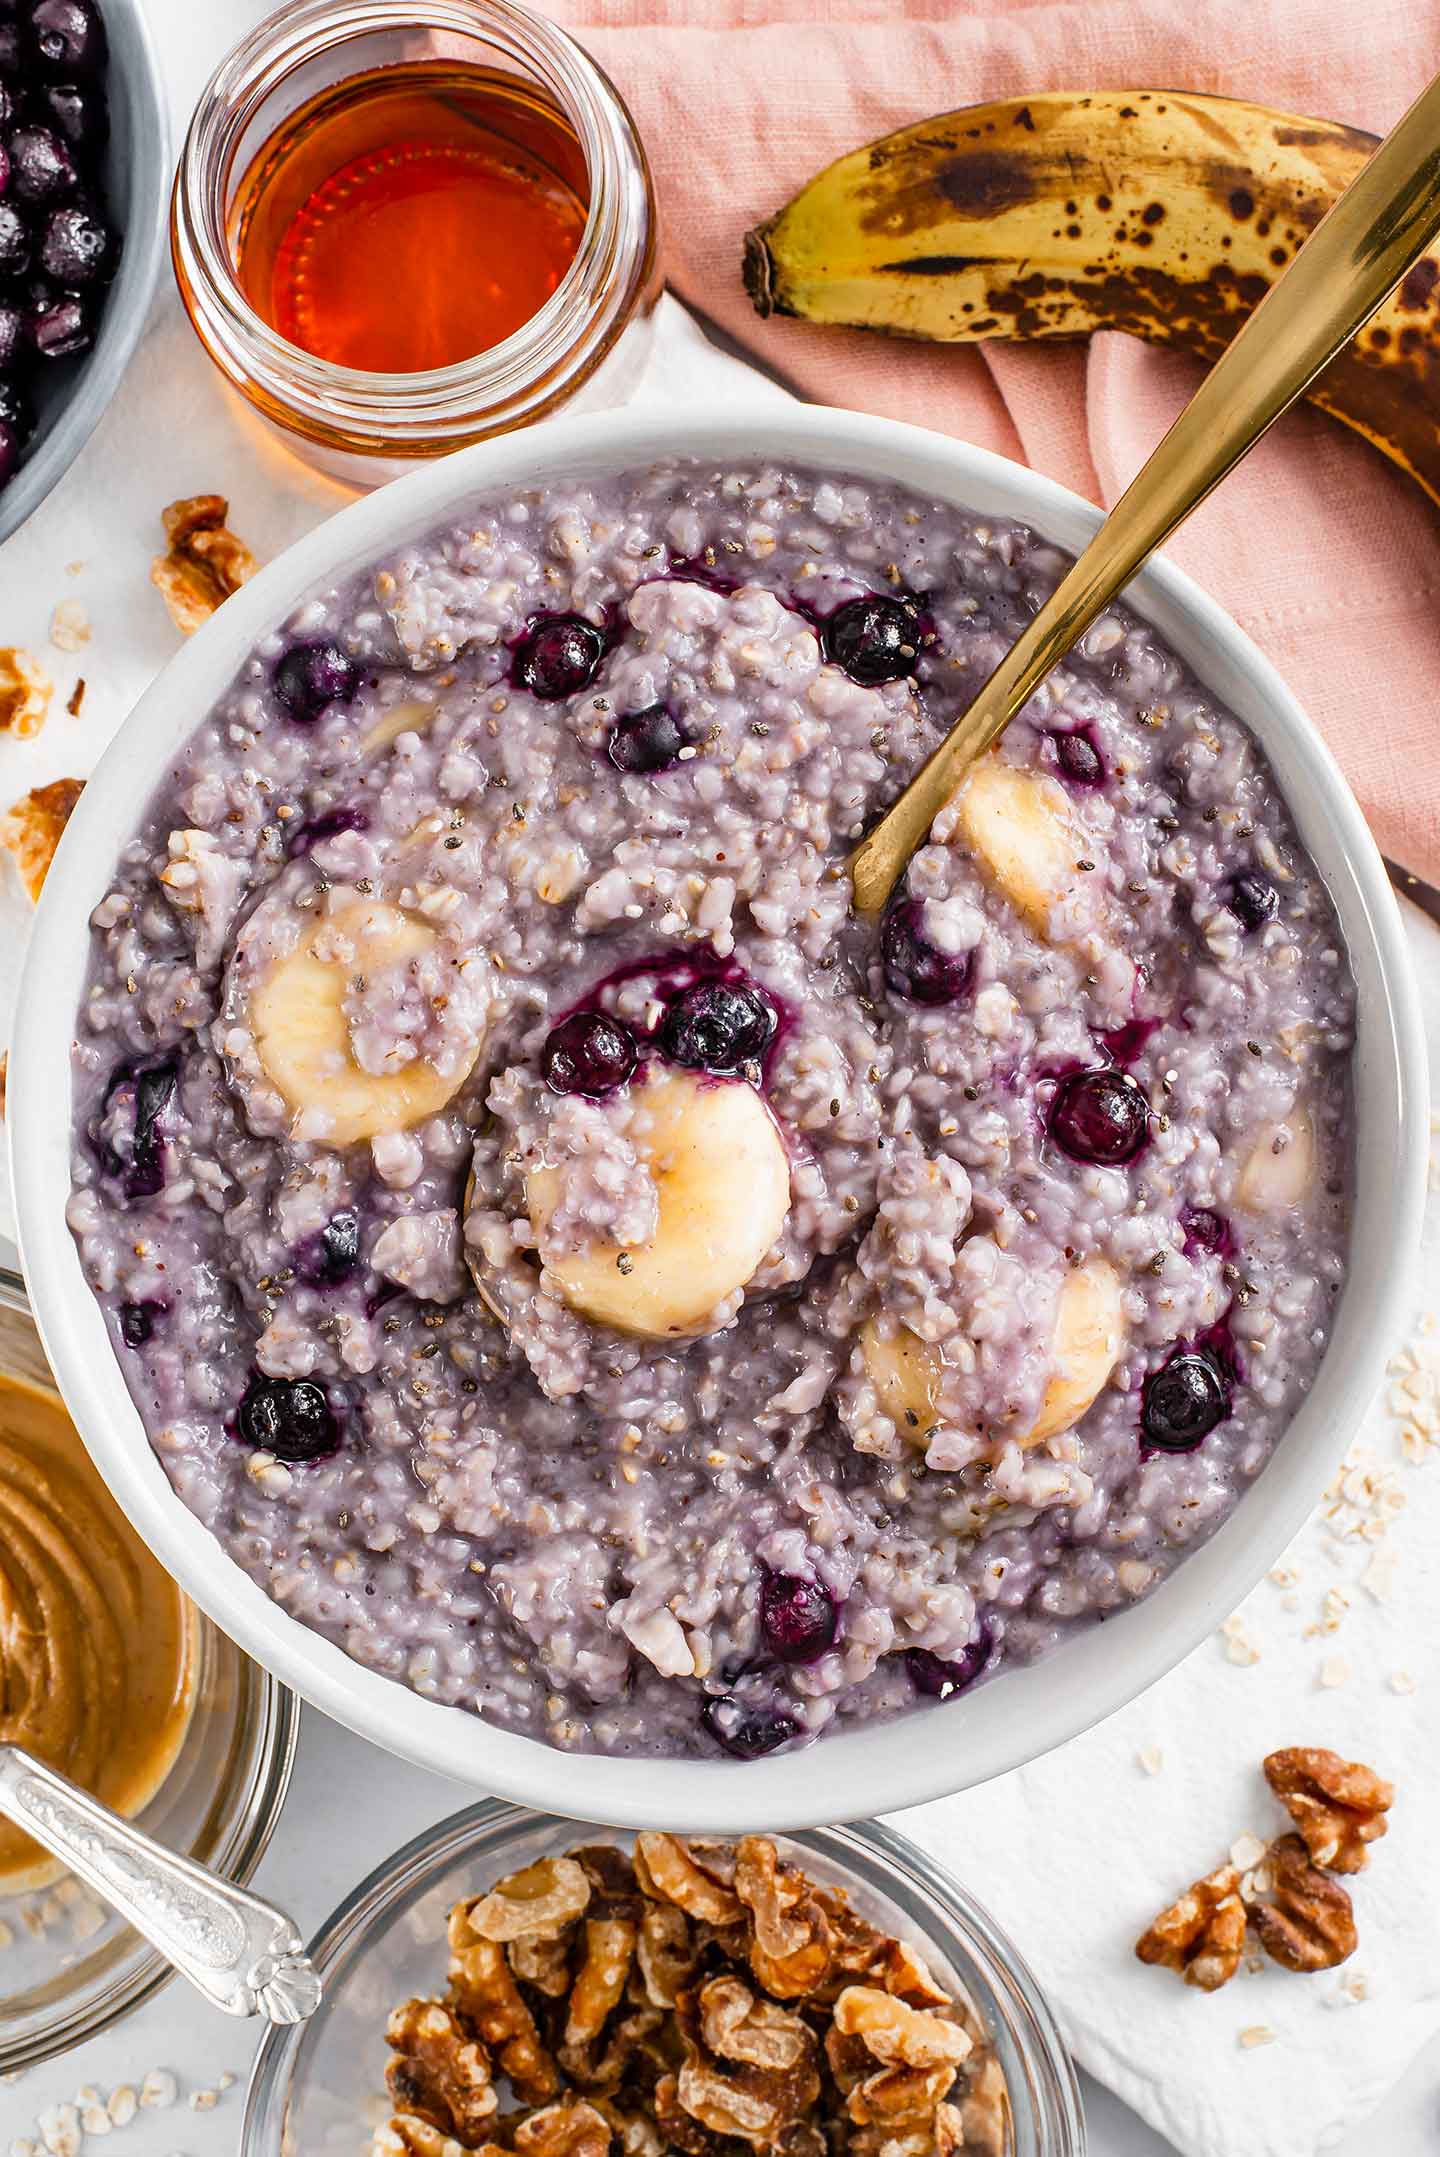 Top down view of quick blueberry banana oatmeal in a bowl. A spoon rests in the middle with soft slices of banana and heated blueberries melting into the purple tinged oats.